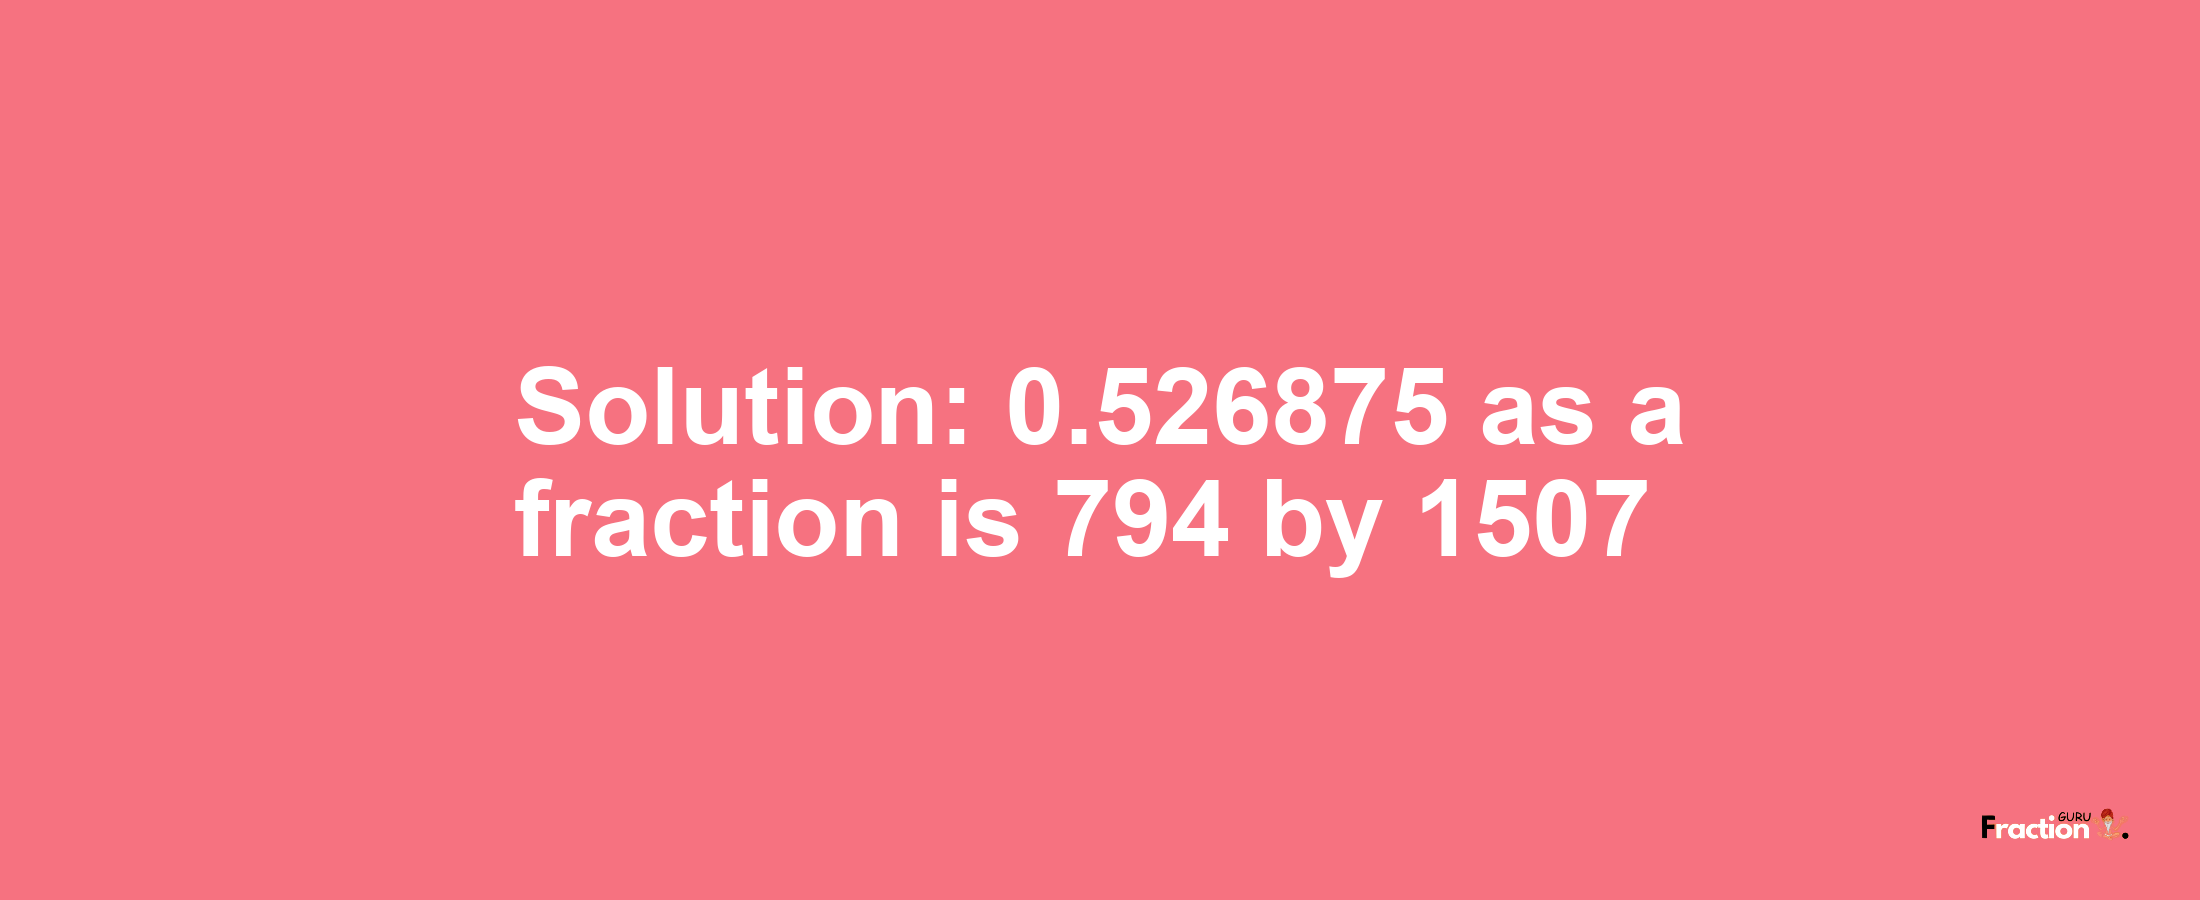 Solution:0.526875 as a fraction is 794/1507